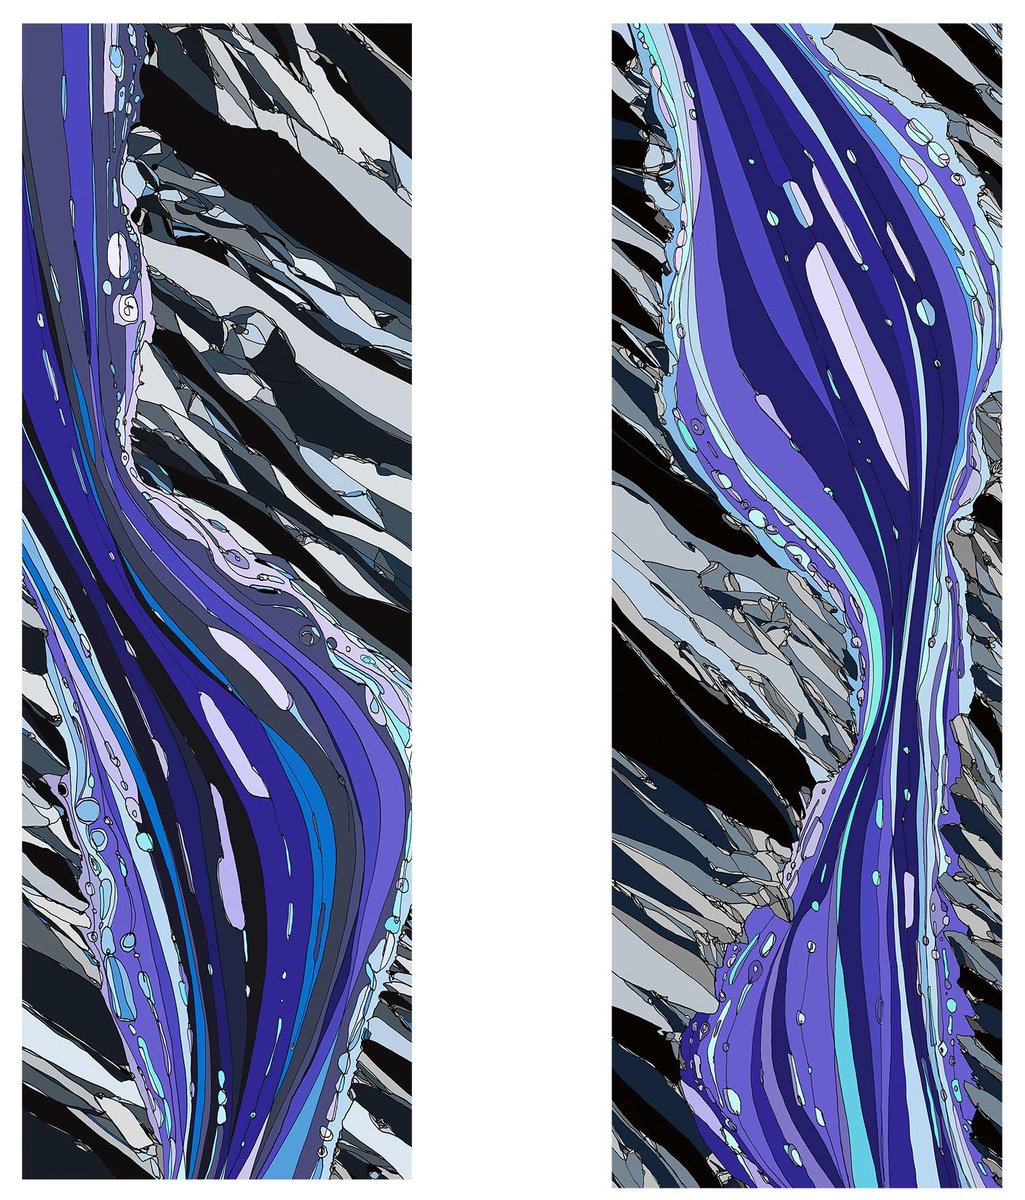 RIVERFLOW 1 and 2 two separate canvases digital artwork of a flowing river and rocks ready... by Mark Lloyd Williams